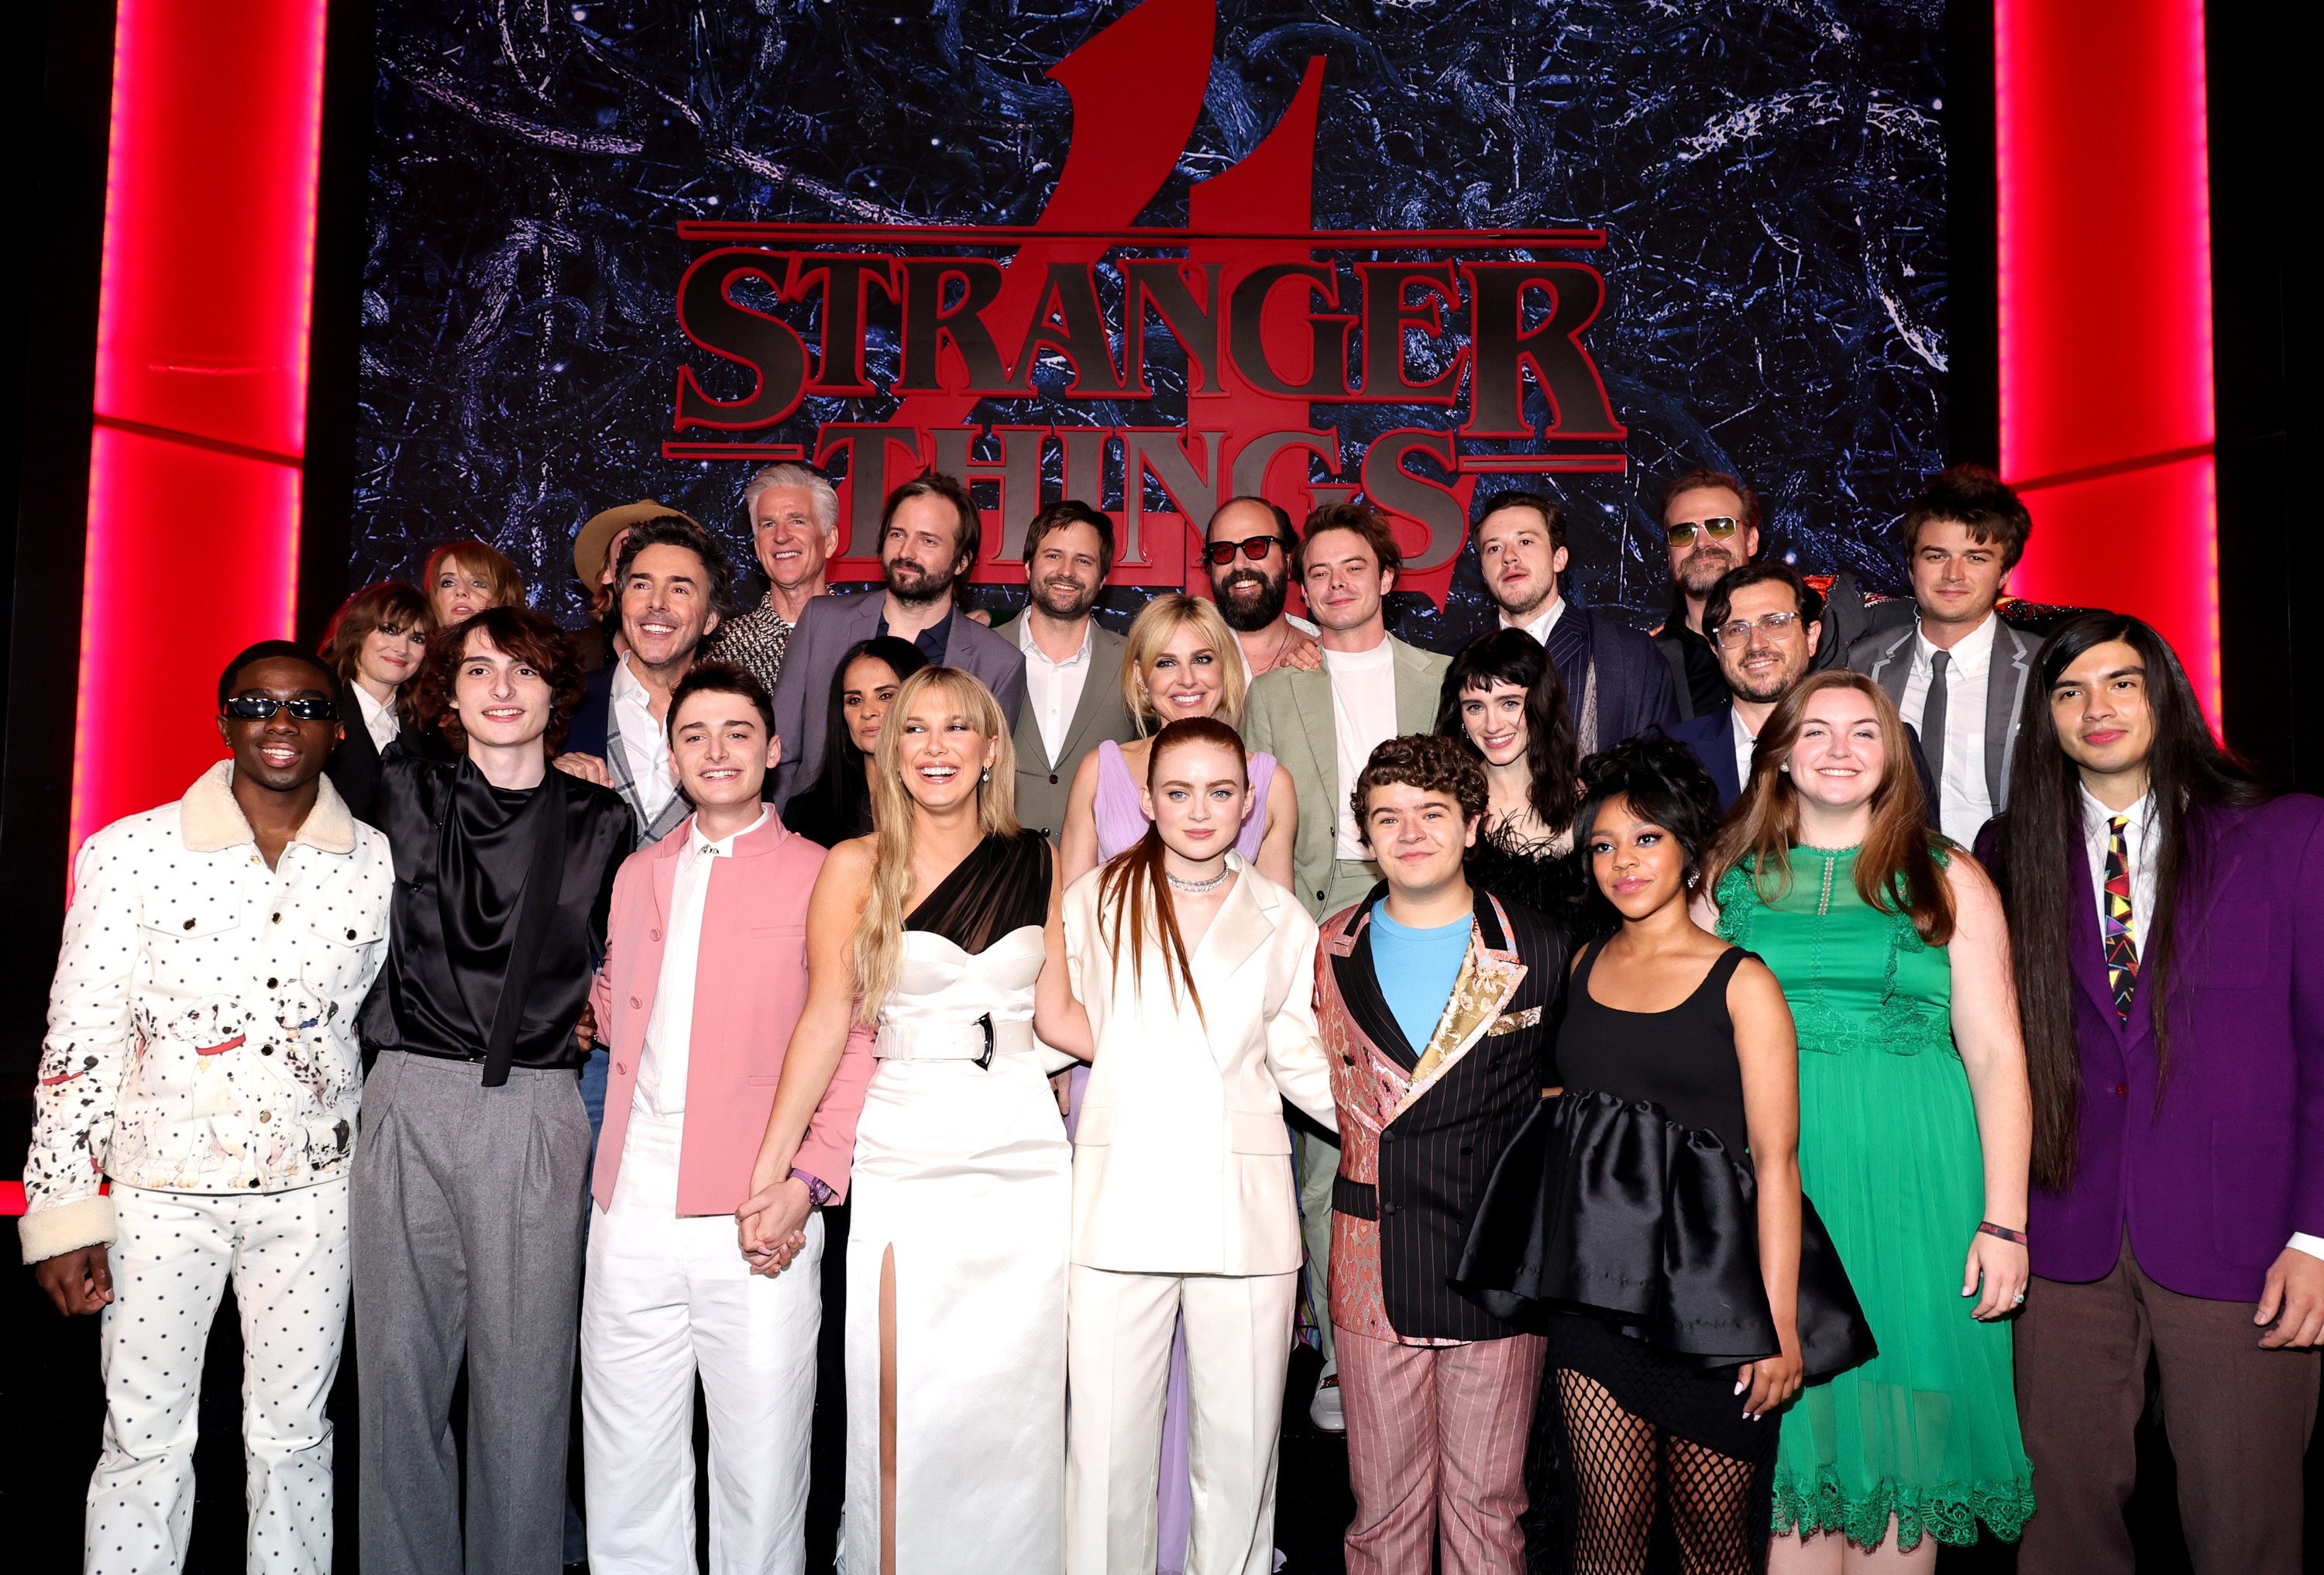 A group photo of the cast